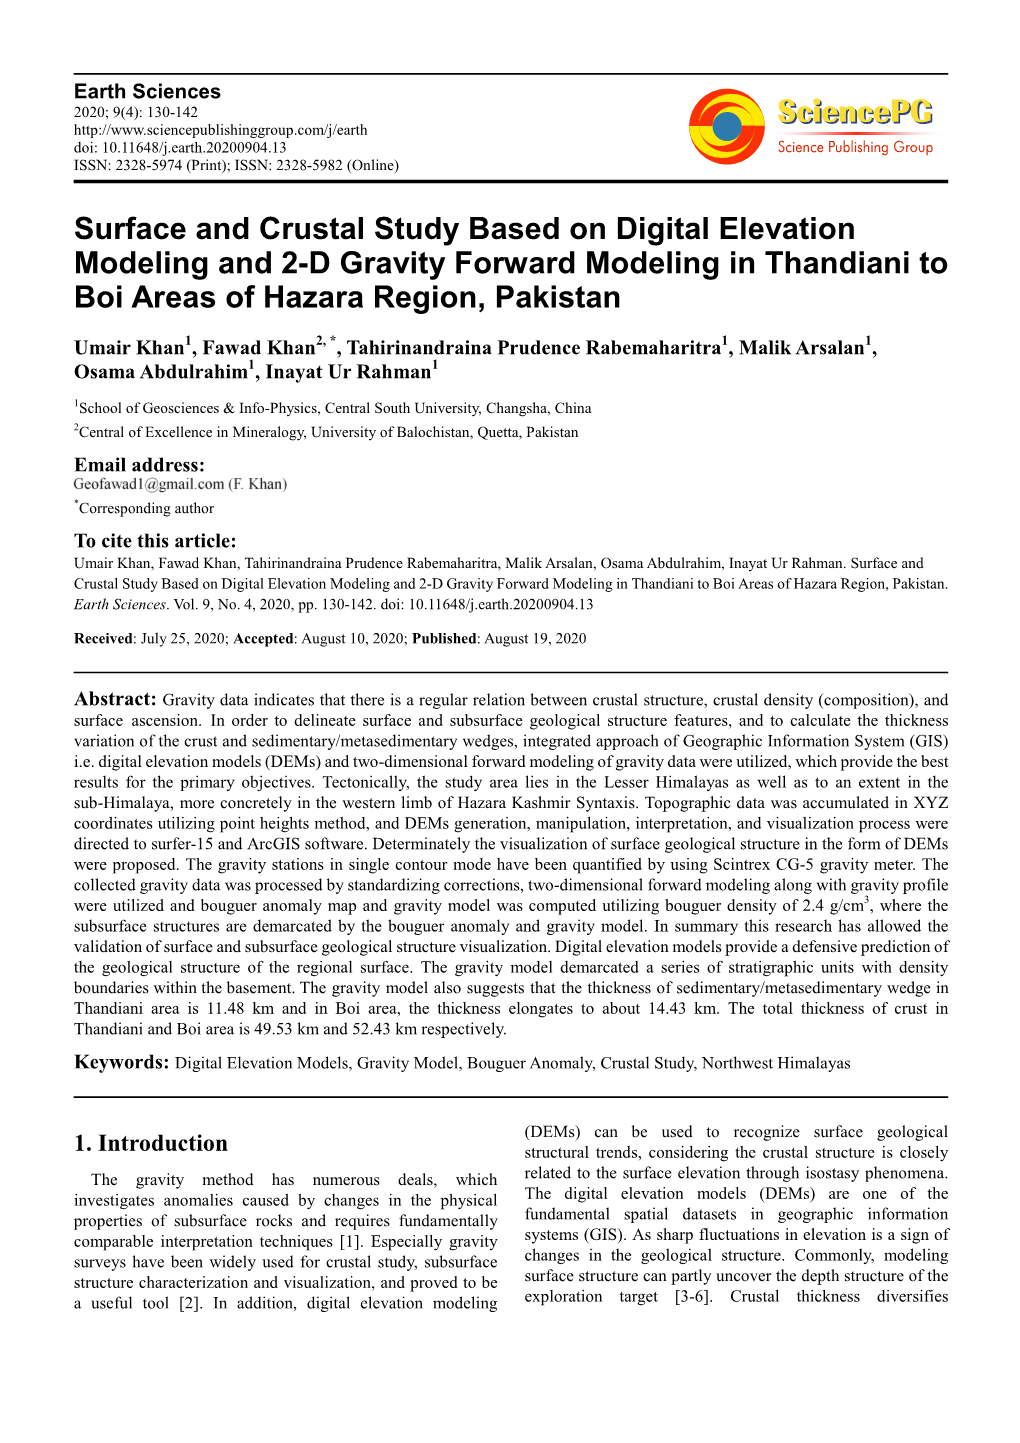 Surface and Crustal Study Based on Digital Elevation Modeling and 2-D Gravity Forward Modeling in Thandiani to Boi Areas of Hazara Region, Pakistan